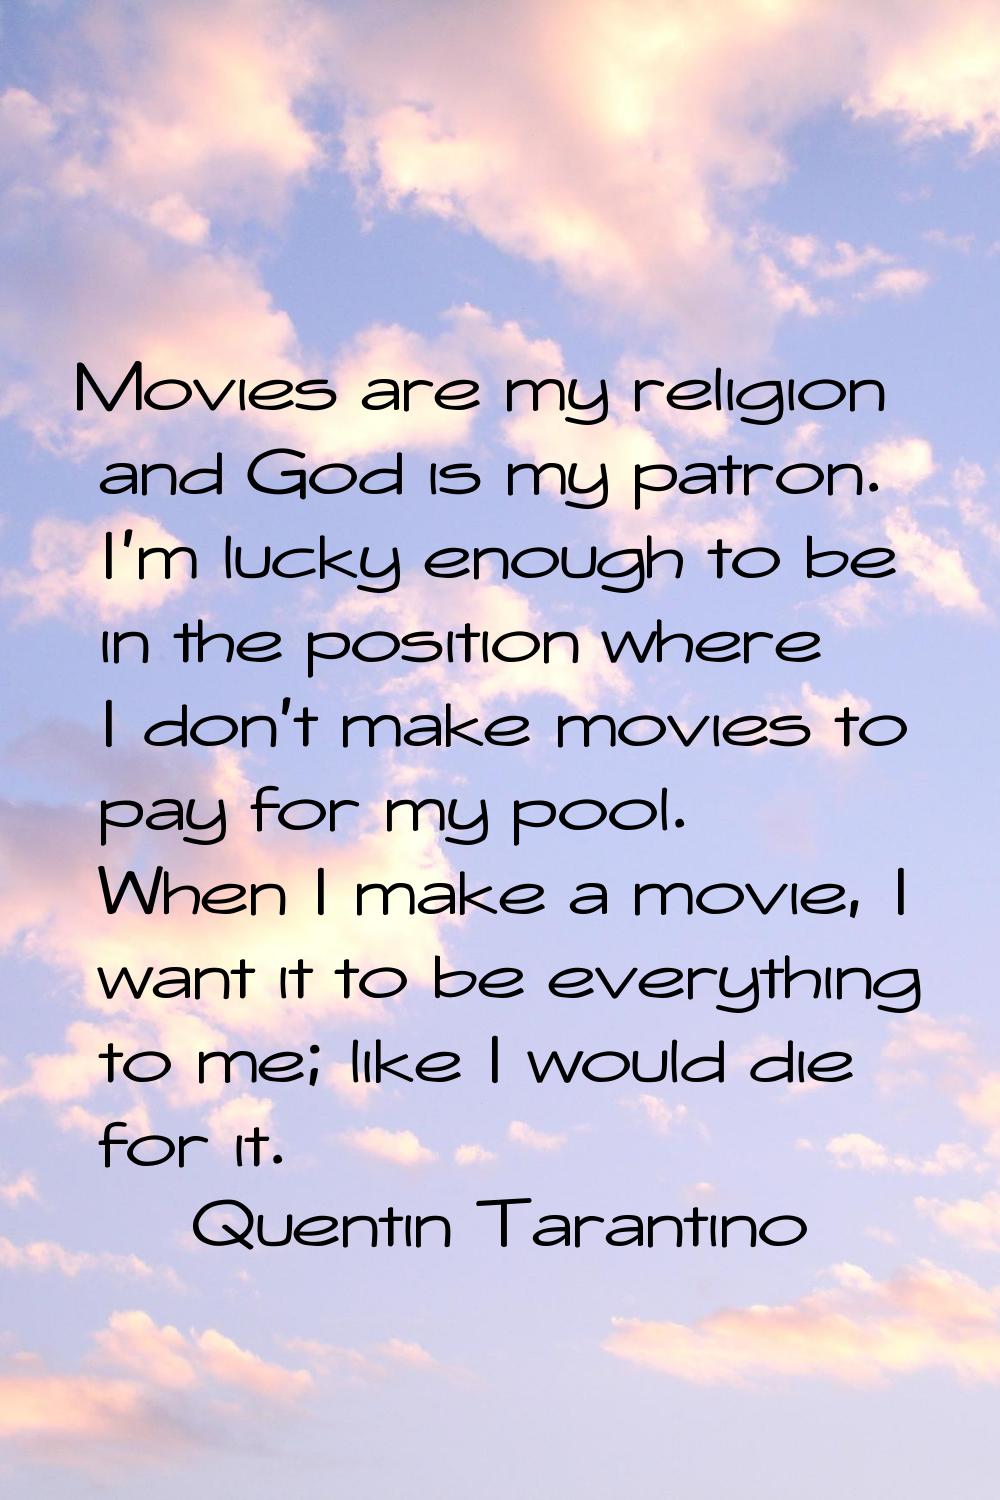 Movies are my religion and God is my patron. I'm lucky enough to be in the position where I don't m